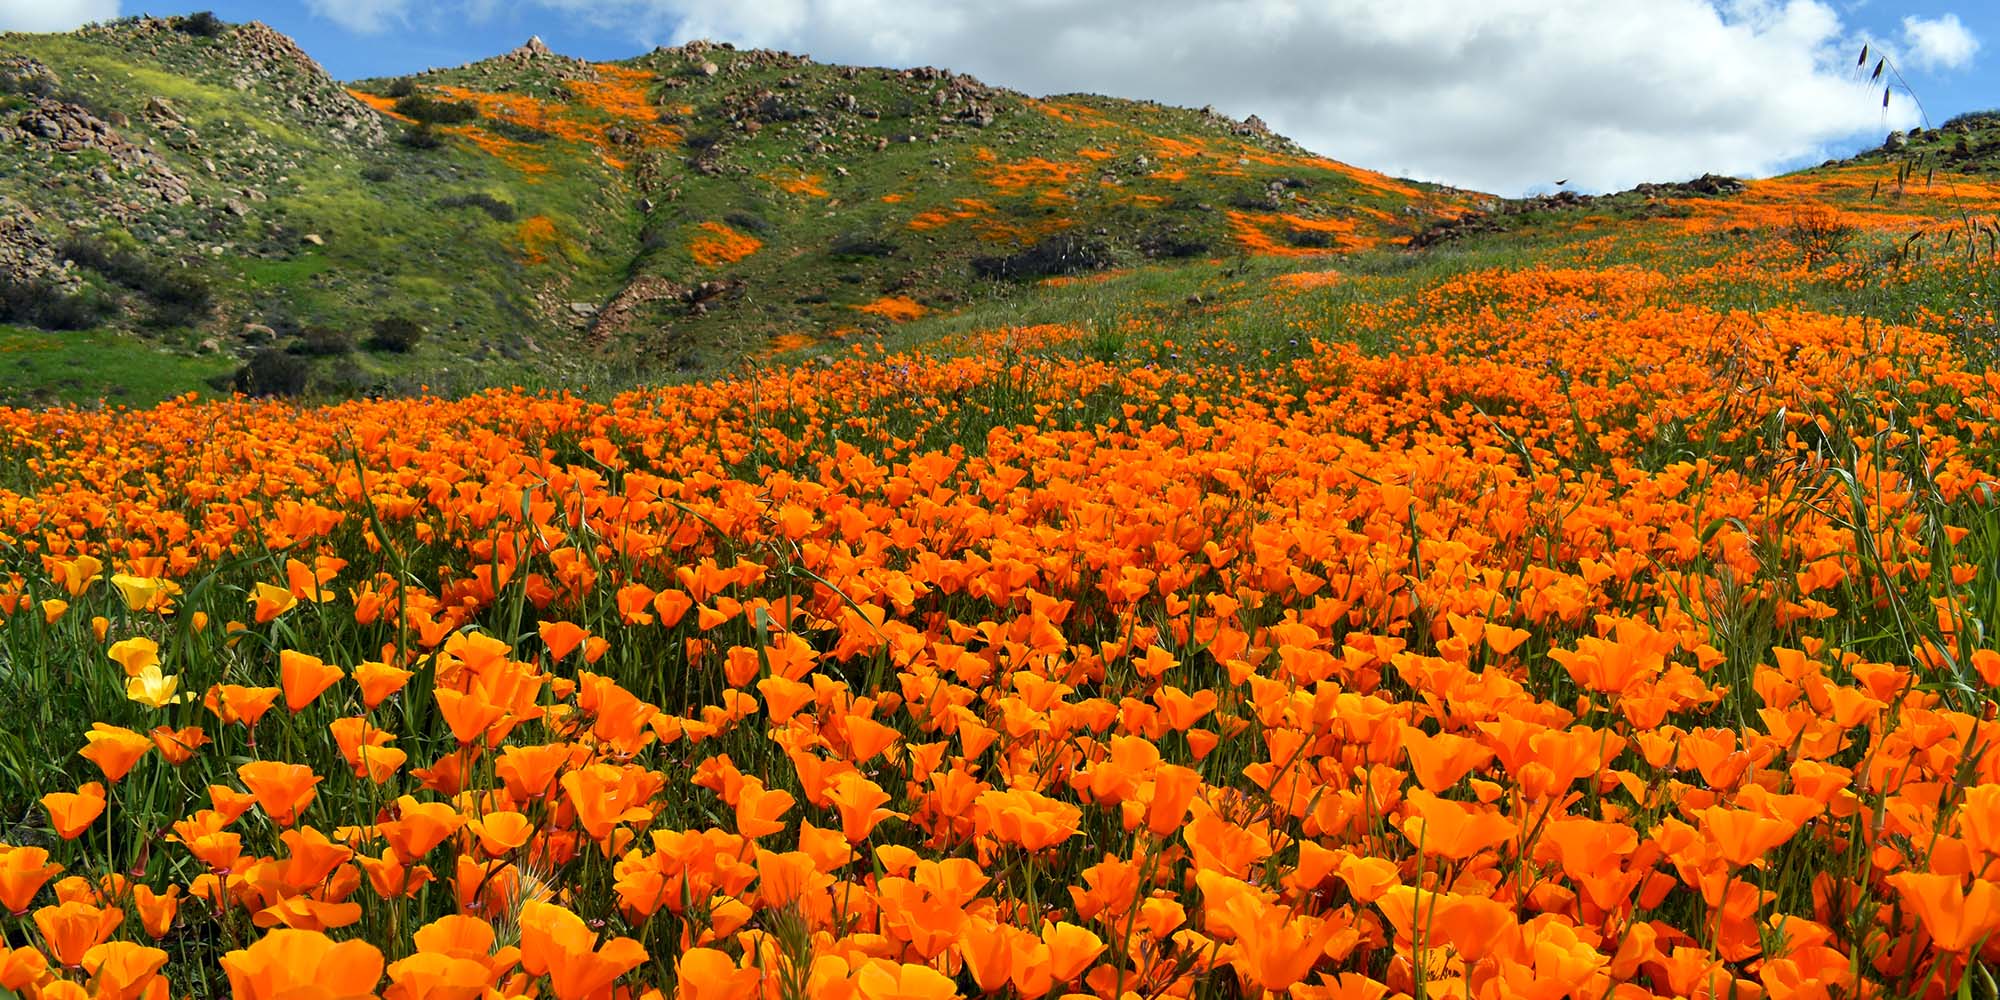 Antelope Valley California Poppy Reserve State Natural Reserve during a super bloom.